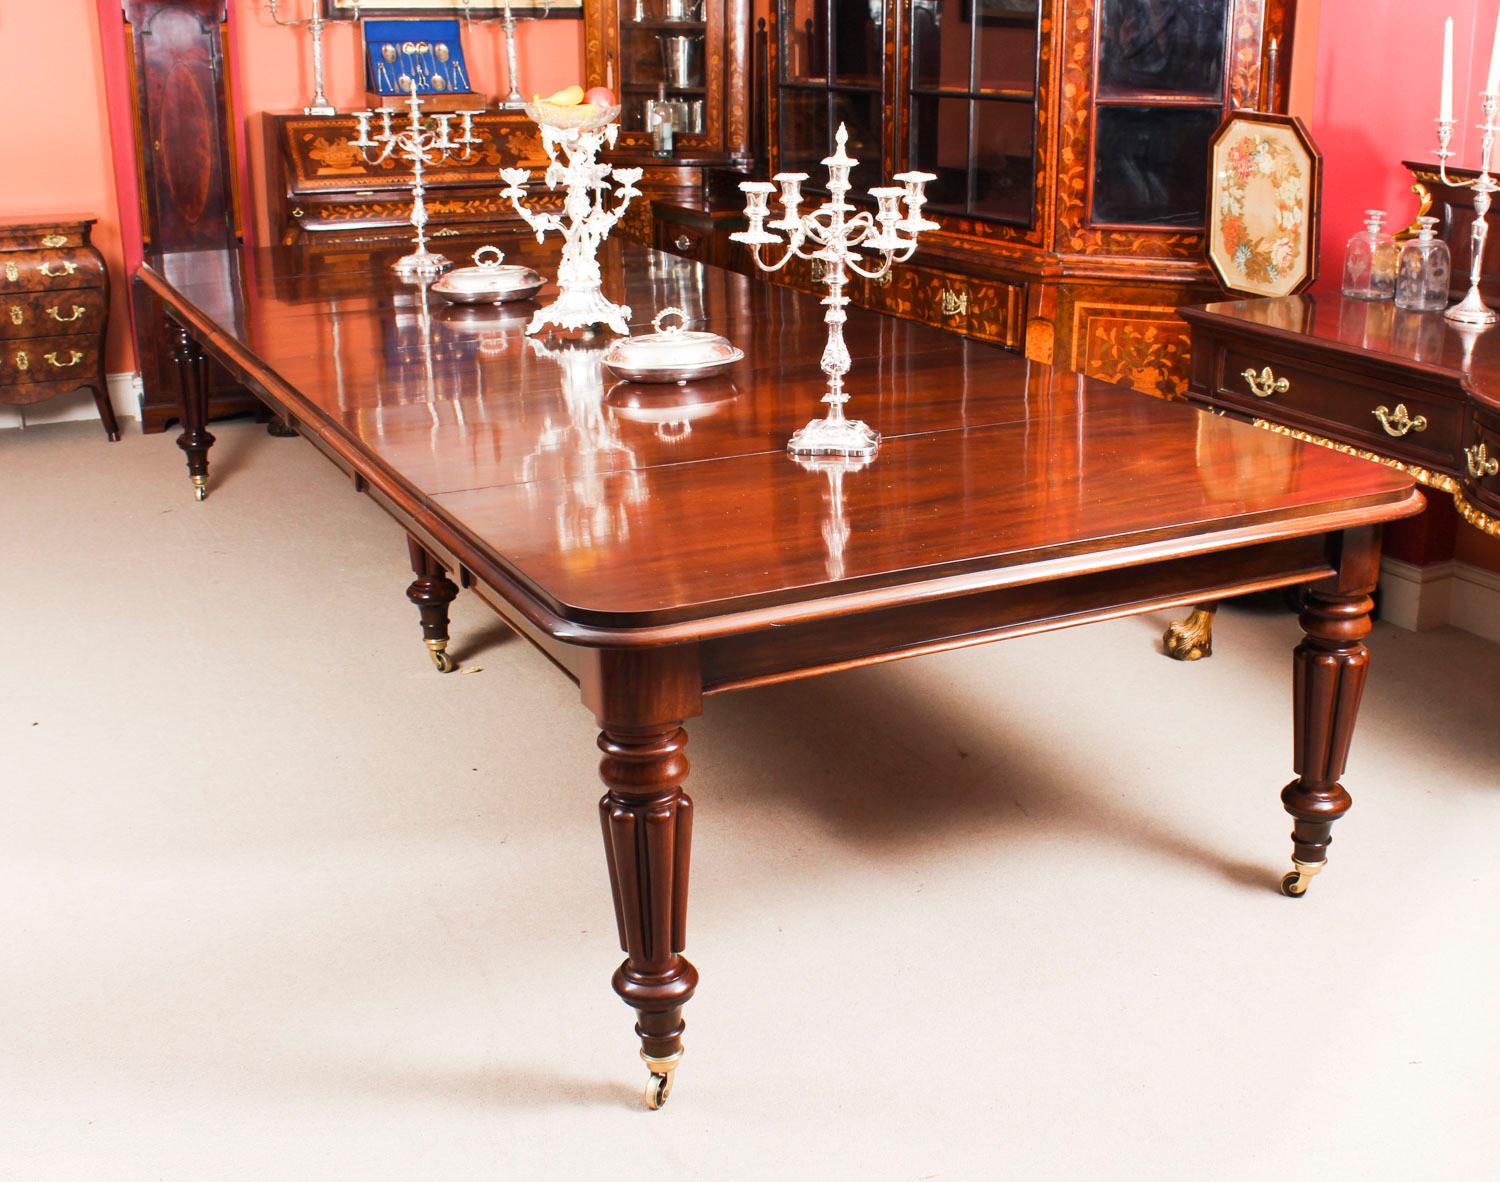 This is a magnificent antique William IV solid mahogany dining table, circa 1830 in date, which can seat fourteen and is also ideal for use as a conference table.

This beautiful table has a rounded rectangular top with a molded edge. The top is